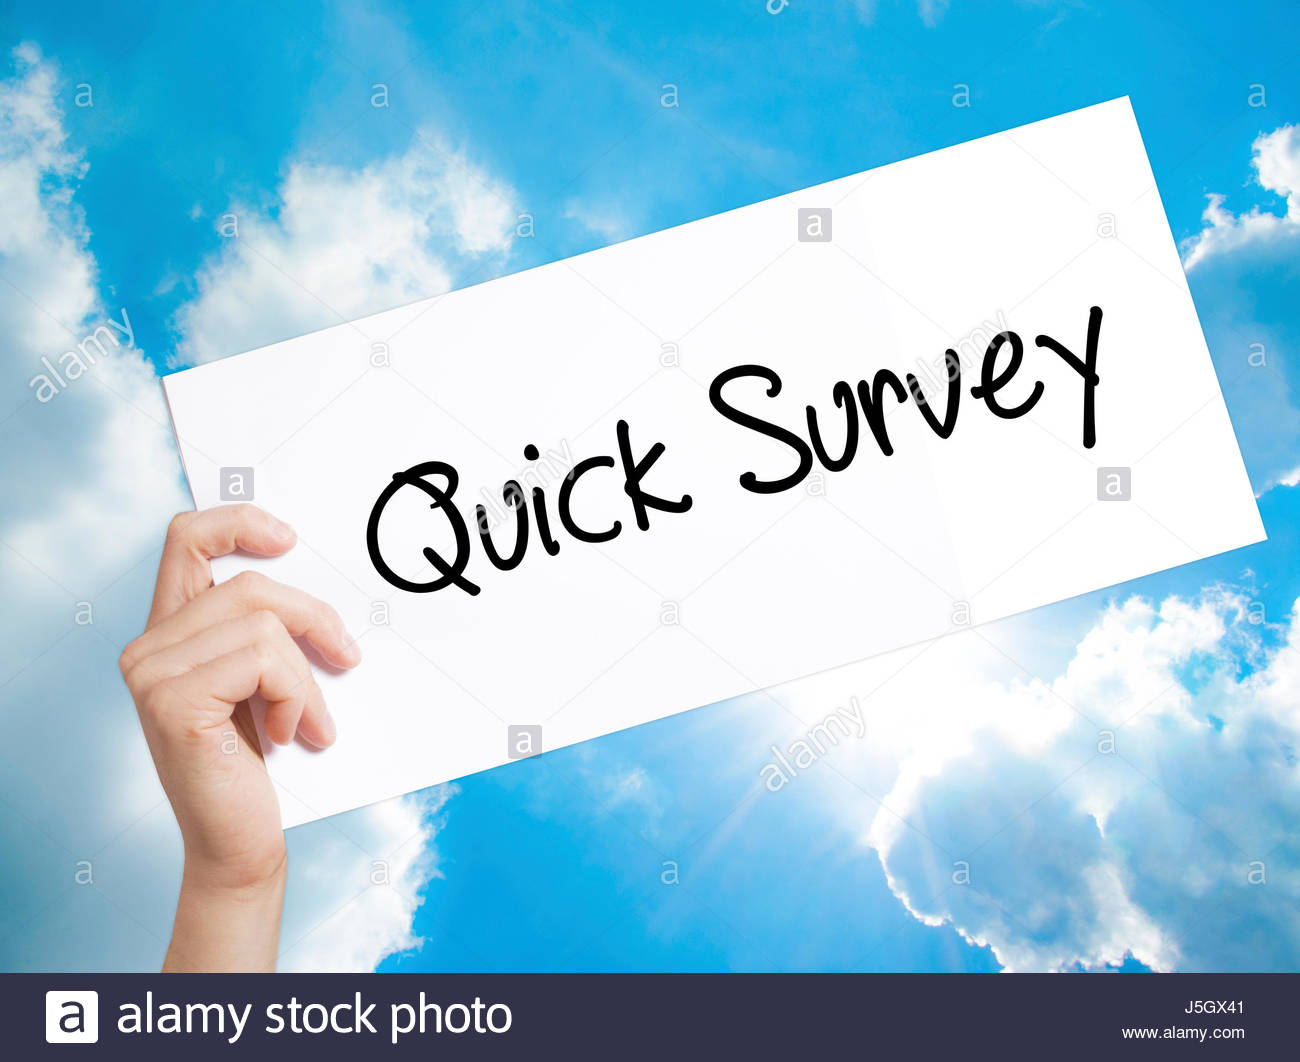 Quick Survey Sign On White Paper Man Hand Holding With Text